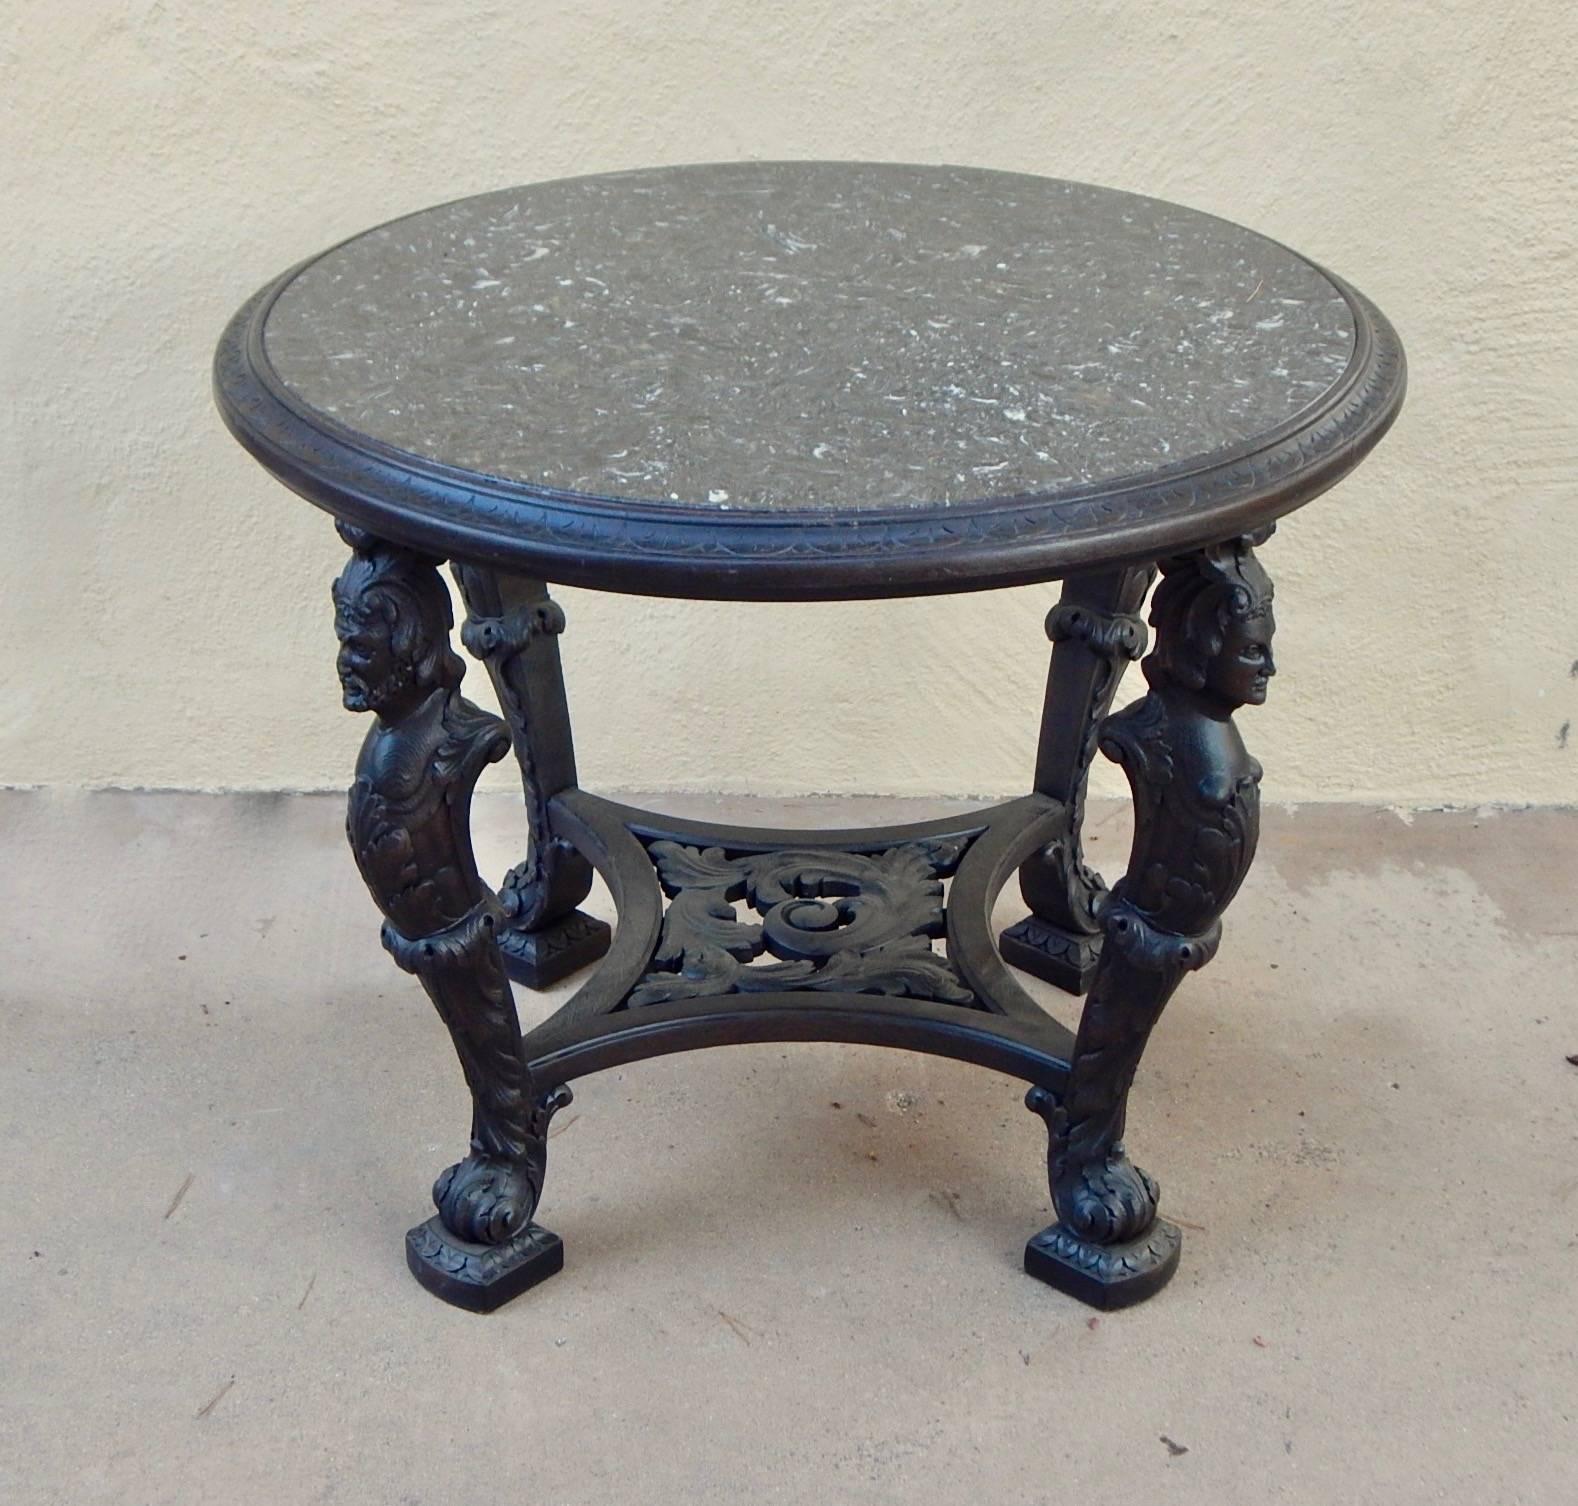 Swedish Gothic Revival table rendered in birch wood with four distinct figural columns.
Wood is in a gray/ebony finish. Wood has just been restored. The stone top is recently crafted. In excellent condition. Made in Sweden, circa 1920.